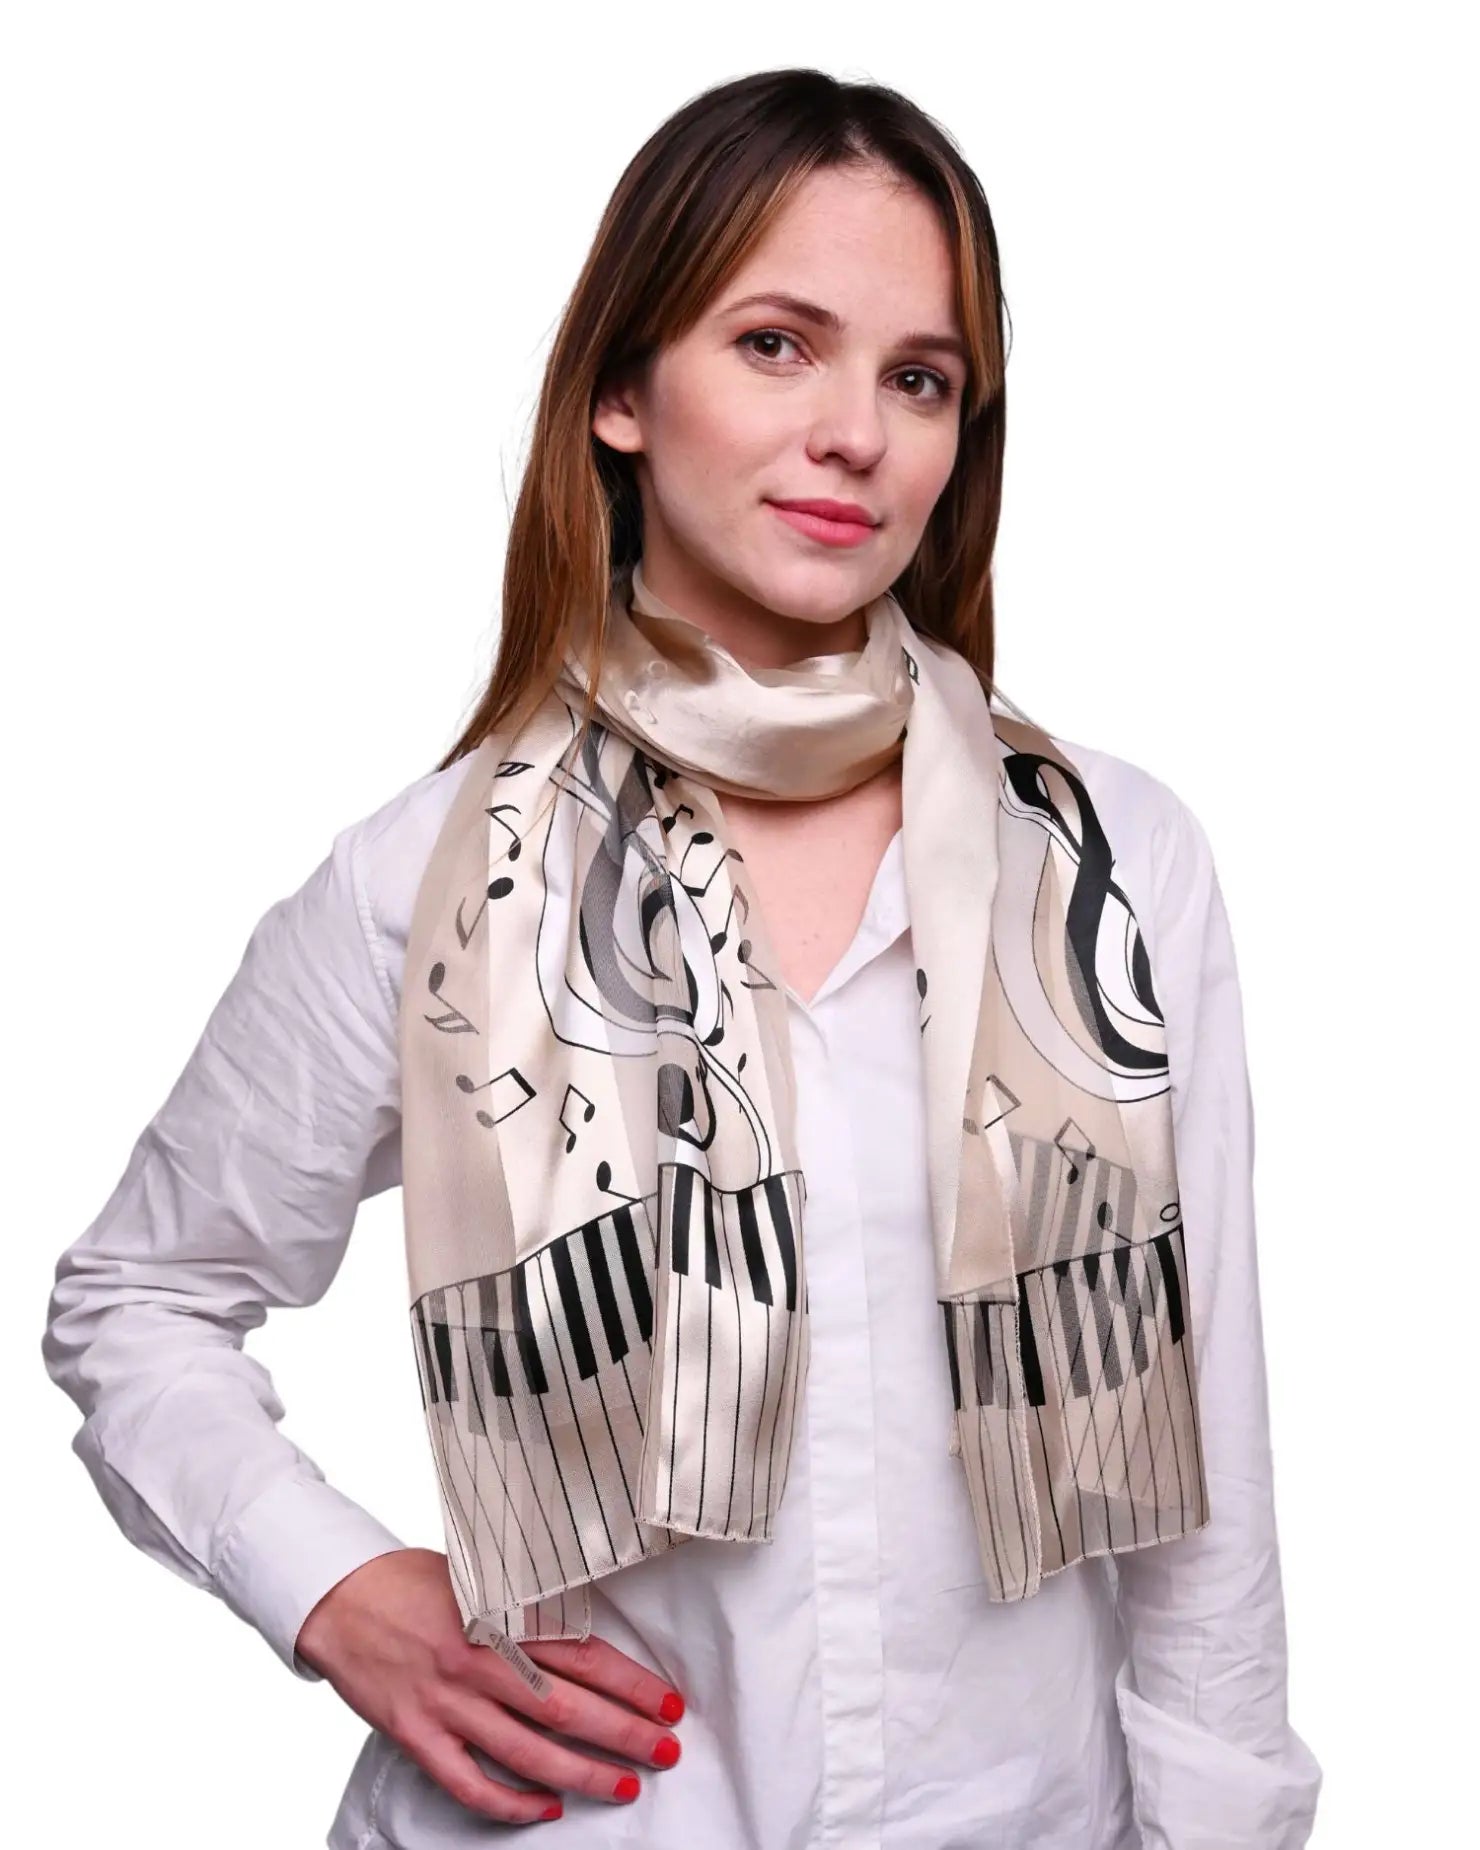 Unisex satin stripe scarf with piano clef note design worn by a woman